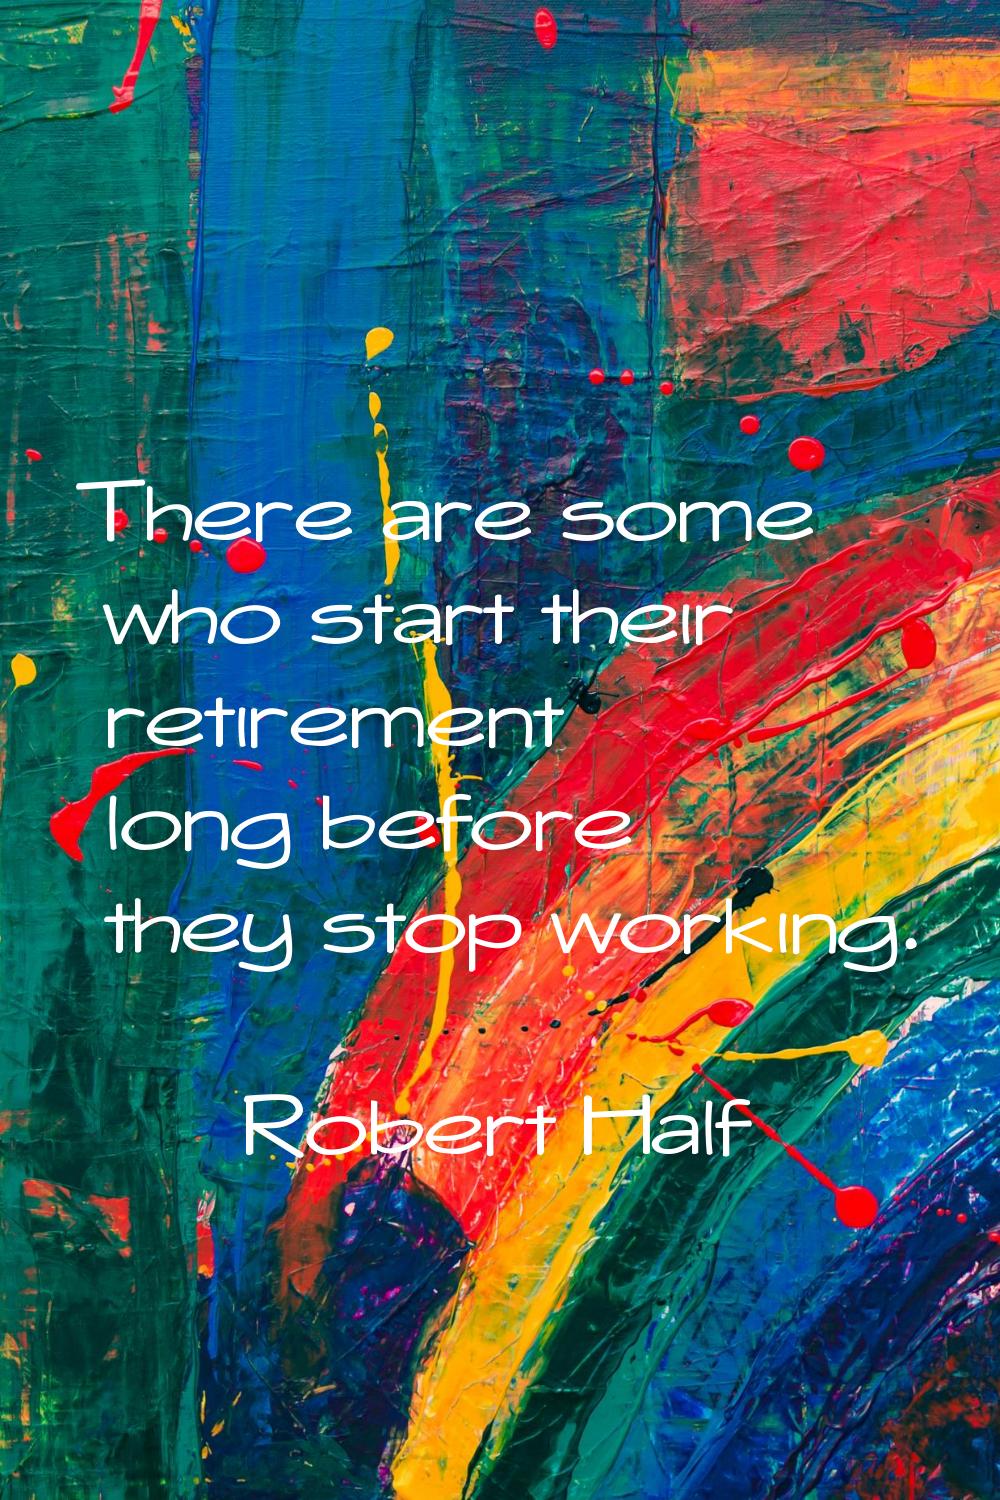 There are some who start their retirement long before they stop working.